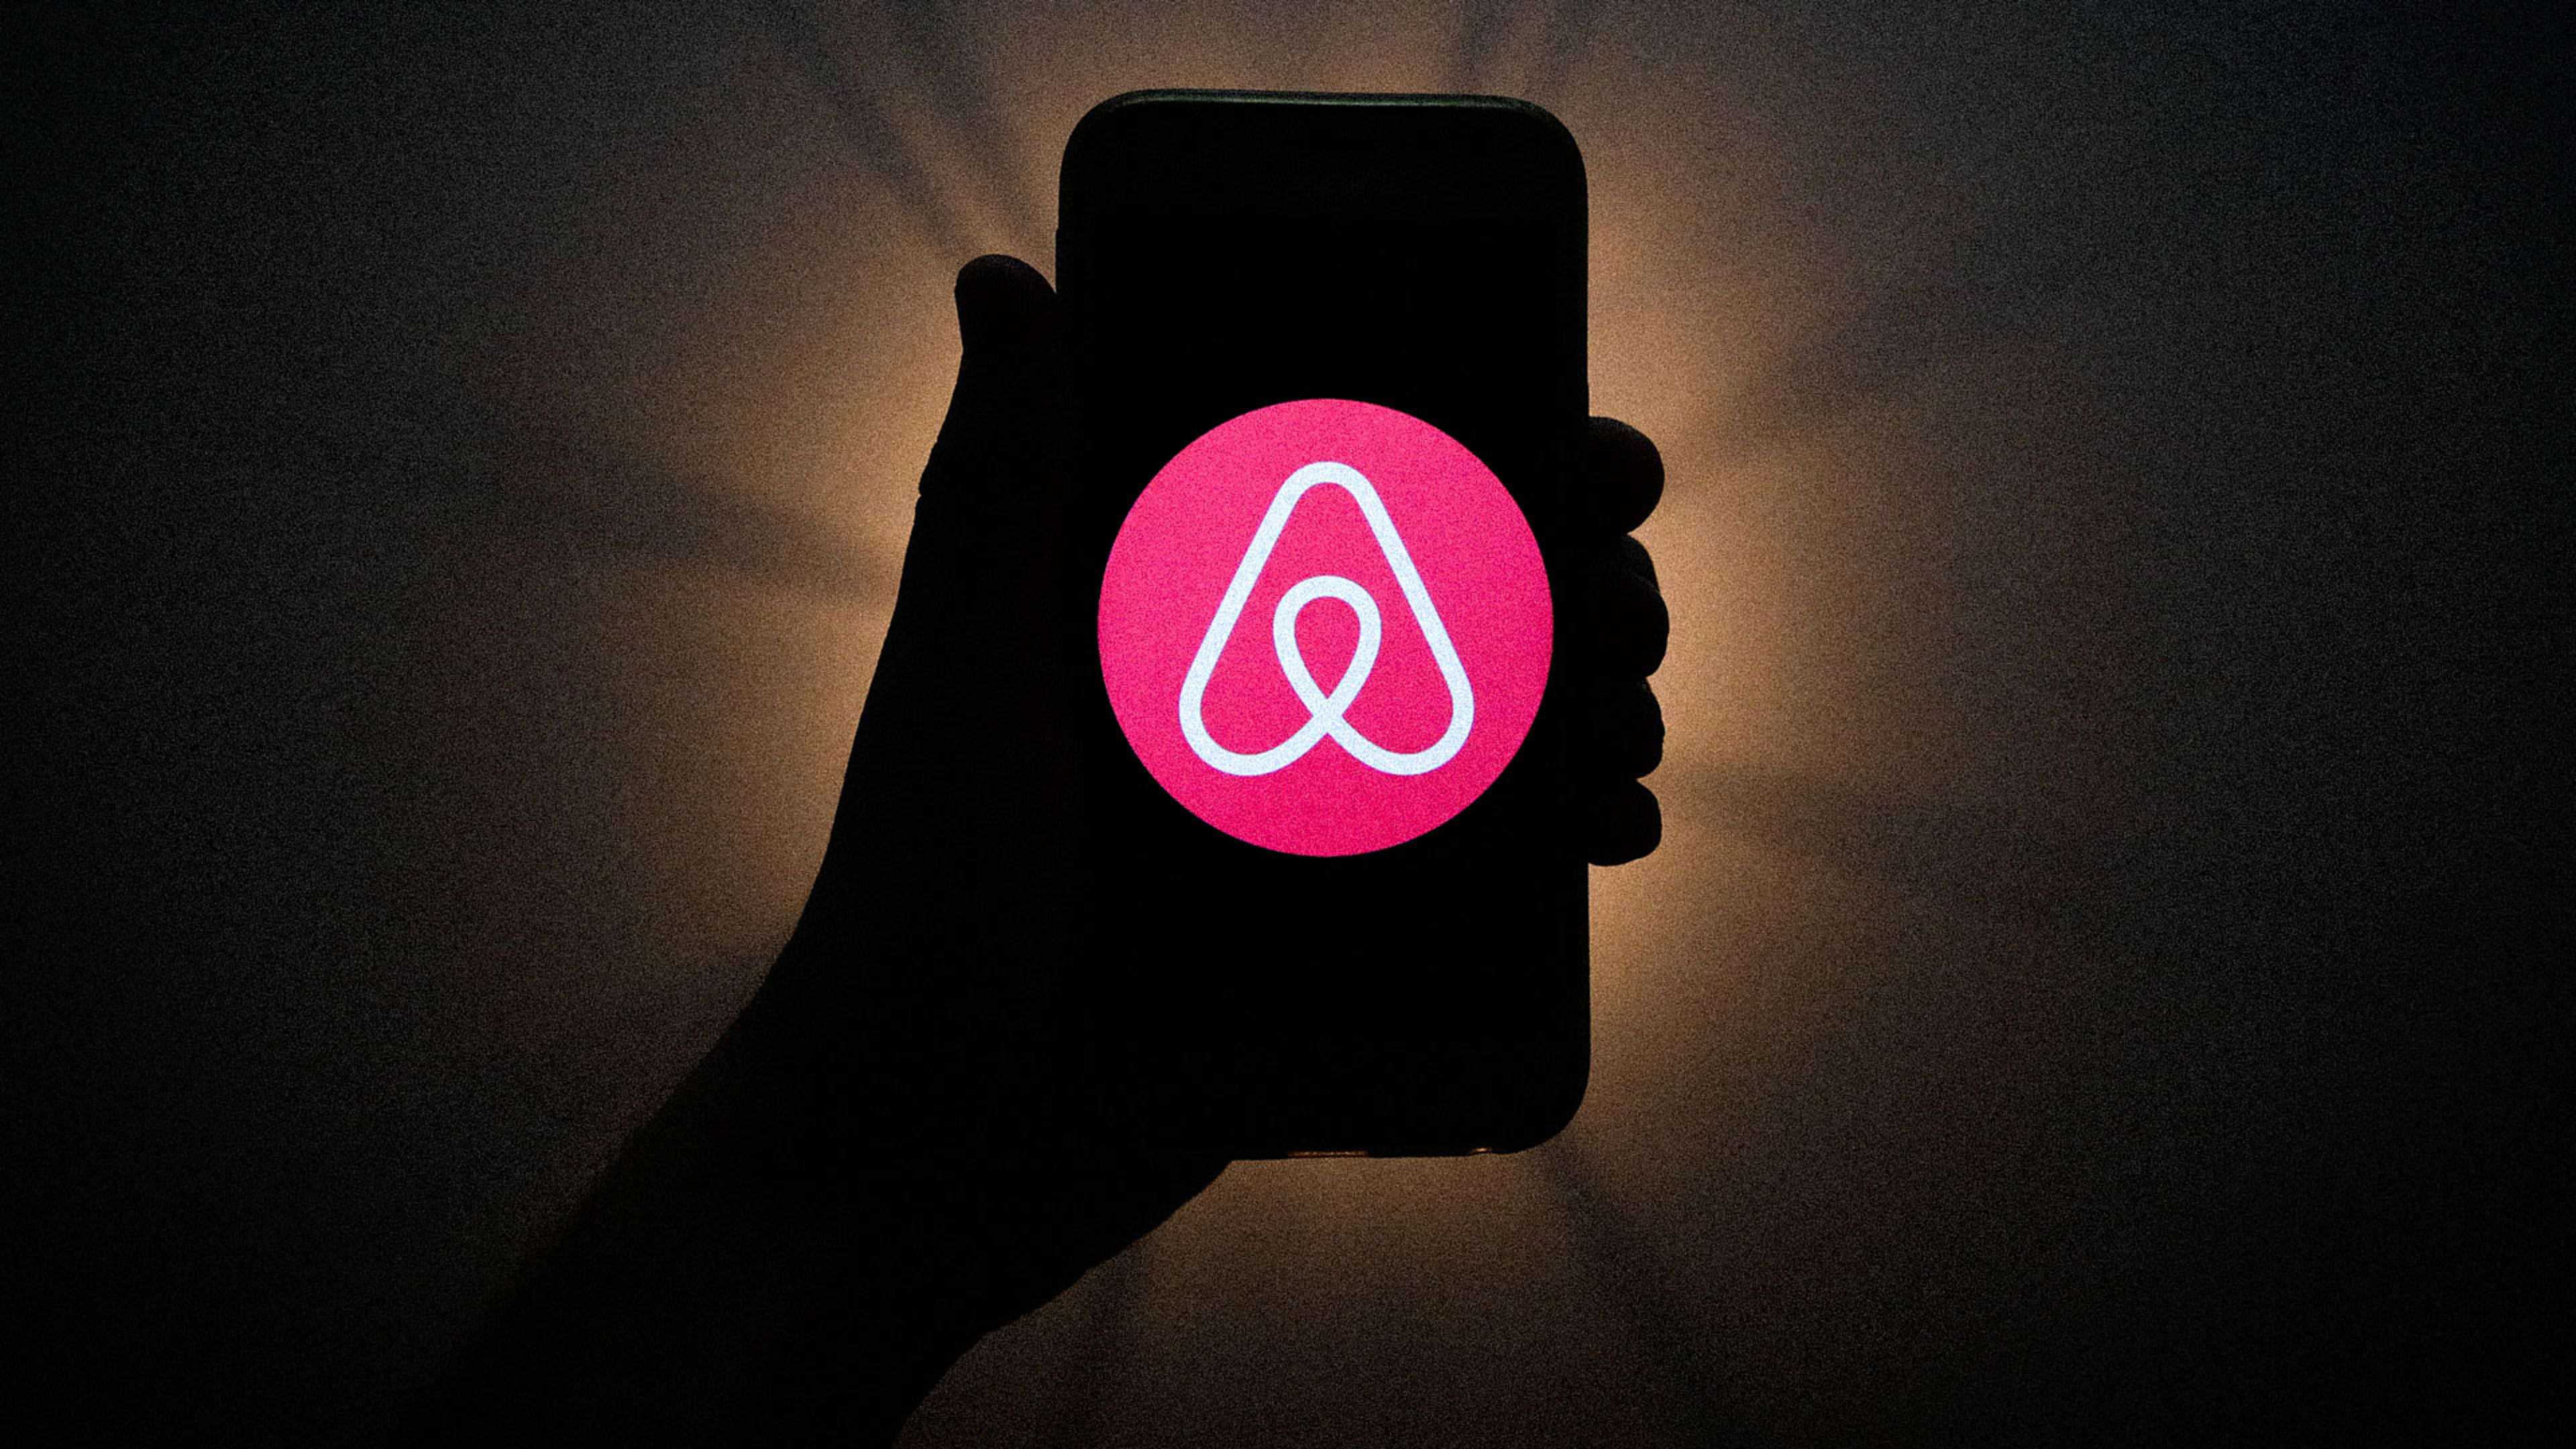 No more parties at Airbnbs: The company makes its party ban permanent